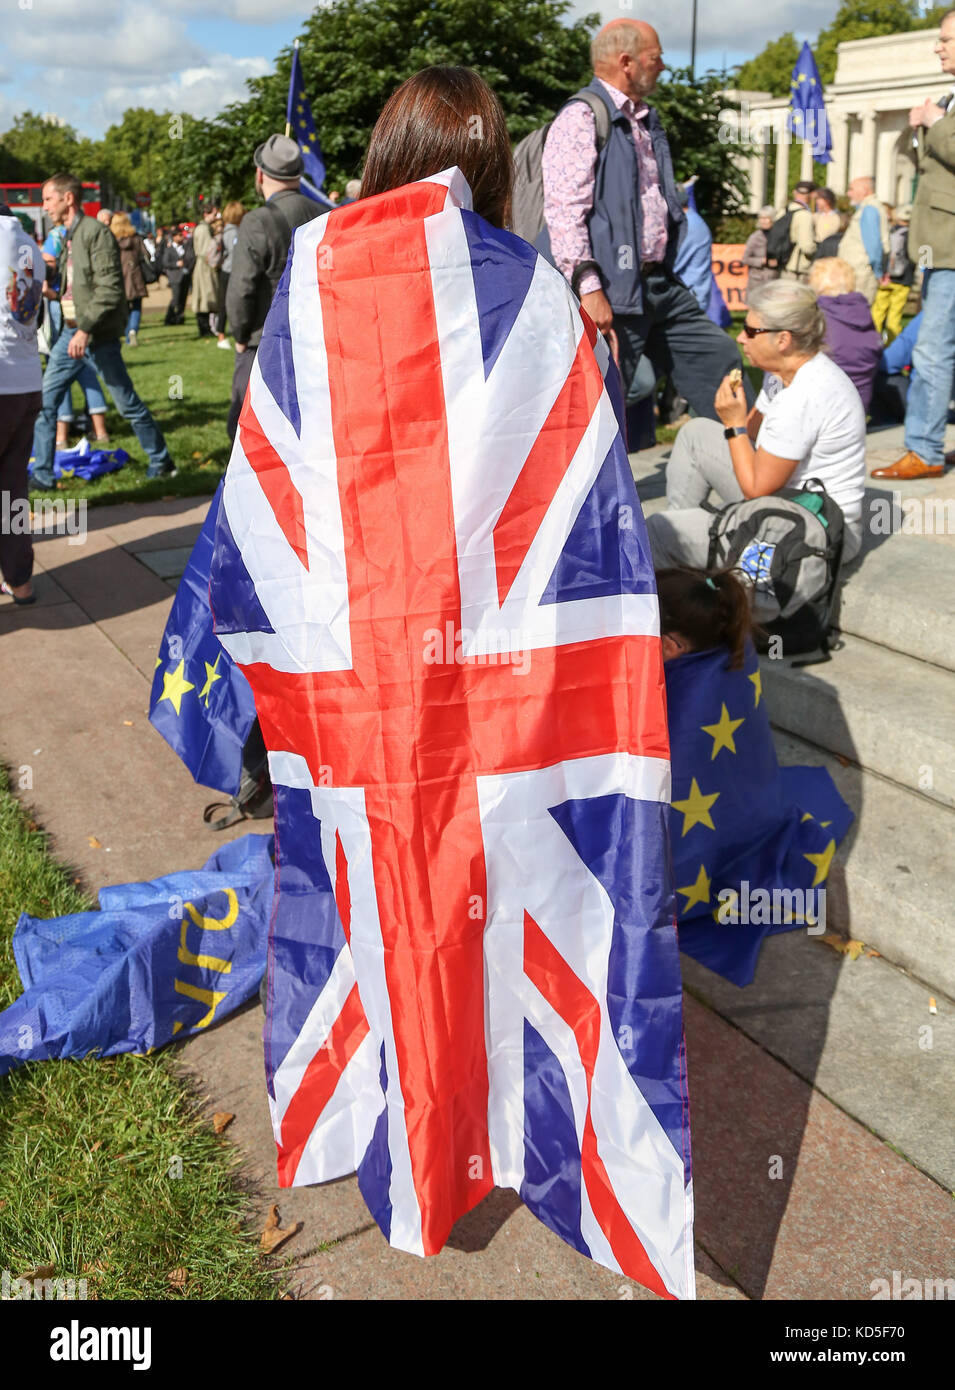 Thousands of anti-Brexit campaigners take part in the People’s March for Europe pro-EU rally in central London. The march and rally is being held against the 2016 Brexit decision – a democratic vote by the people of Britain.  Featuring: Atmosphere Where: London, United Kingdom When: 09 Sep 2017 Credit: Dinendra Haria/WENN.com Stock Photo